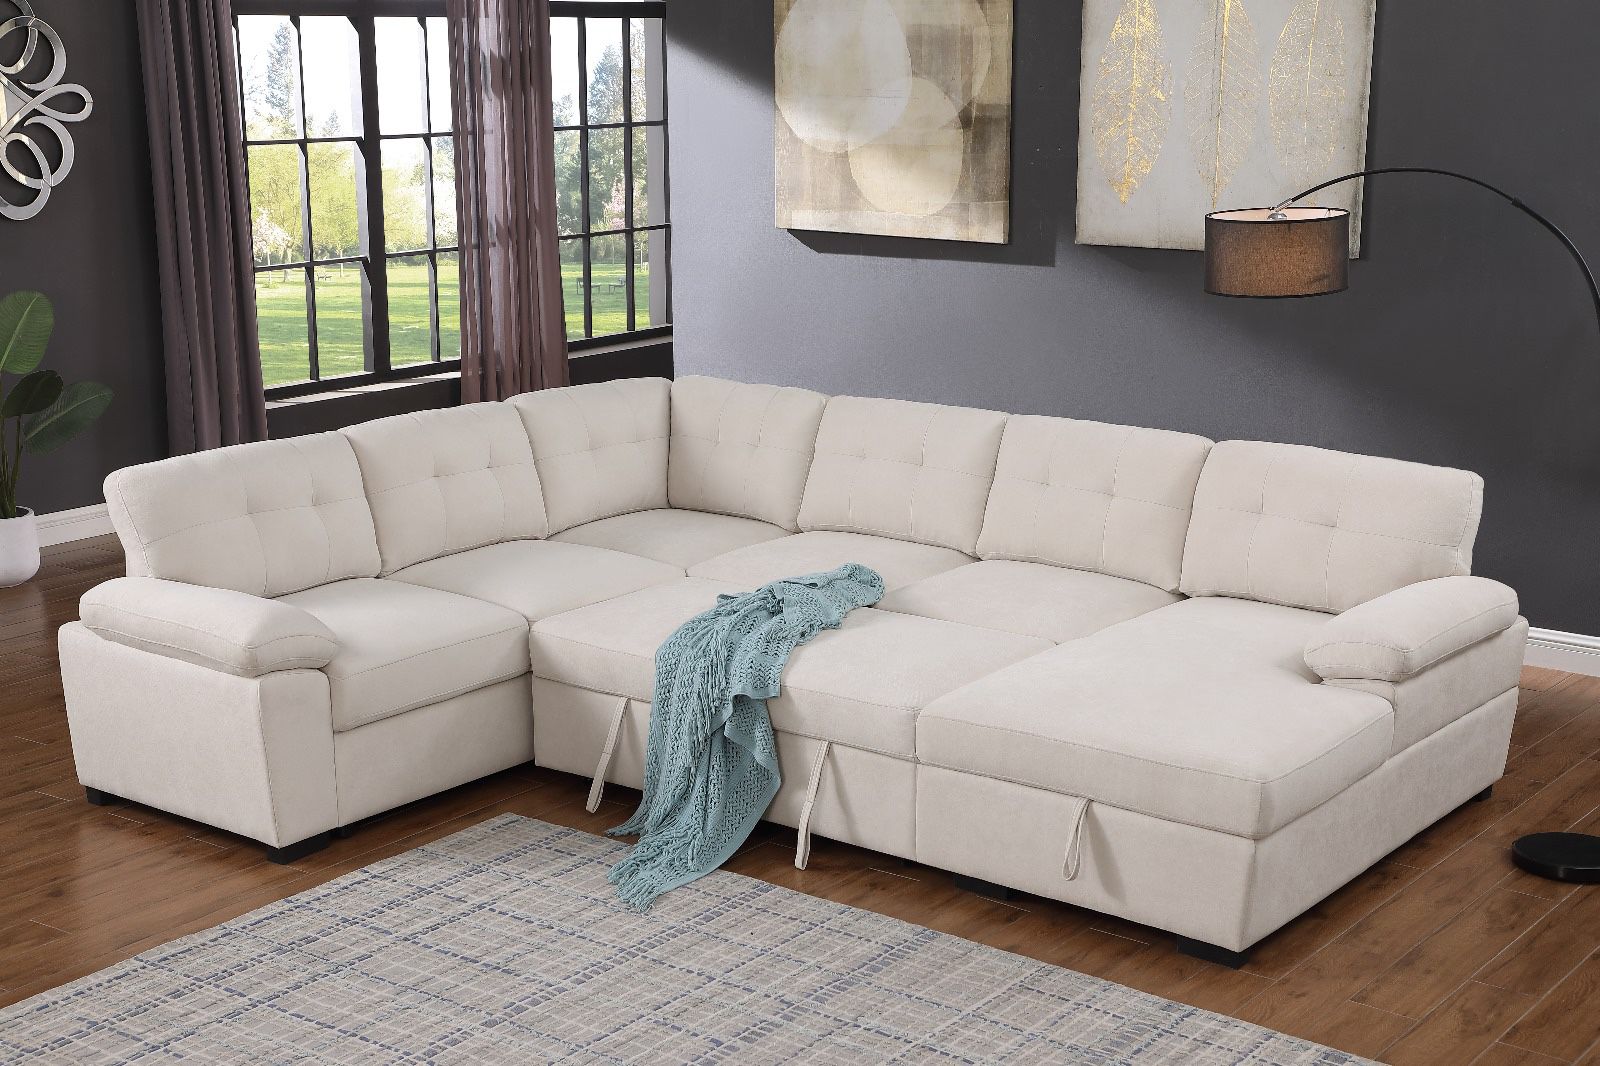 New! Beige Sectional, Beige Sofa, Beige Couch, Sofa, Sectional, Sectionals, Sectional Couch, Sofabed, Sofa Bed, Large Sectional Sofa Bed, Sleeper Sofa